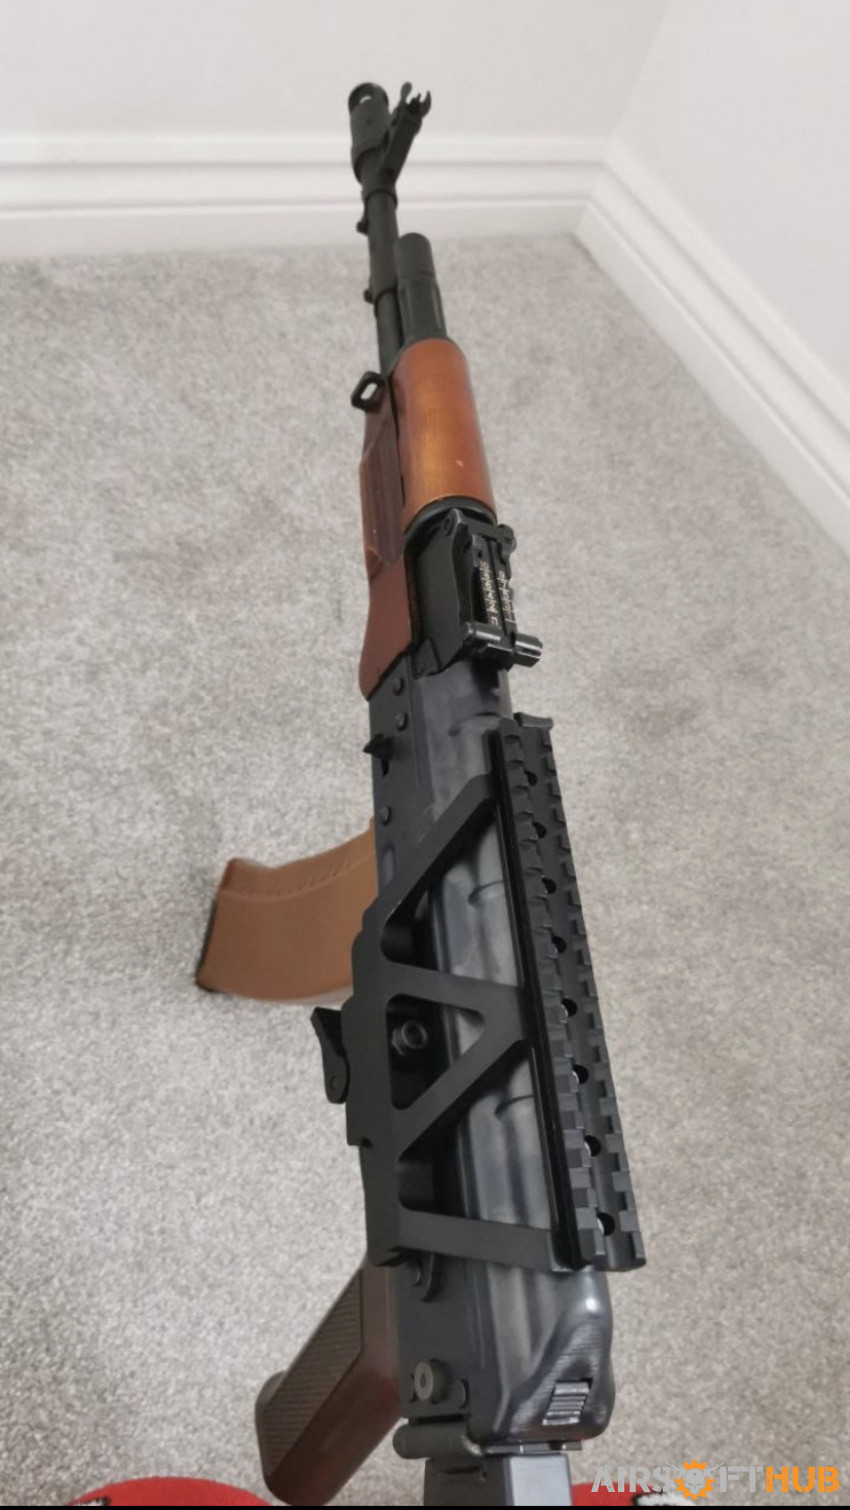 LCT AK47 fully upgraded DMR - Used airsoft equipment